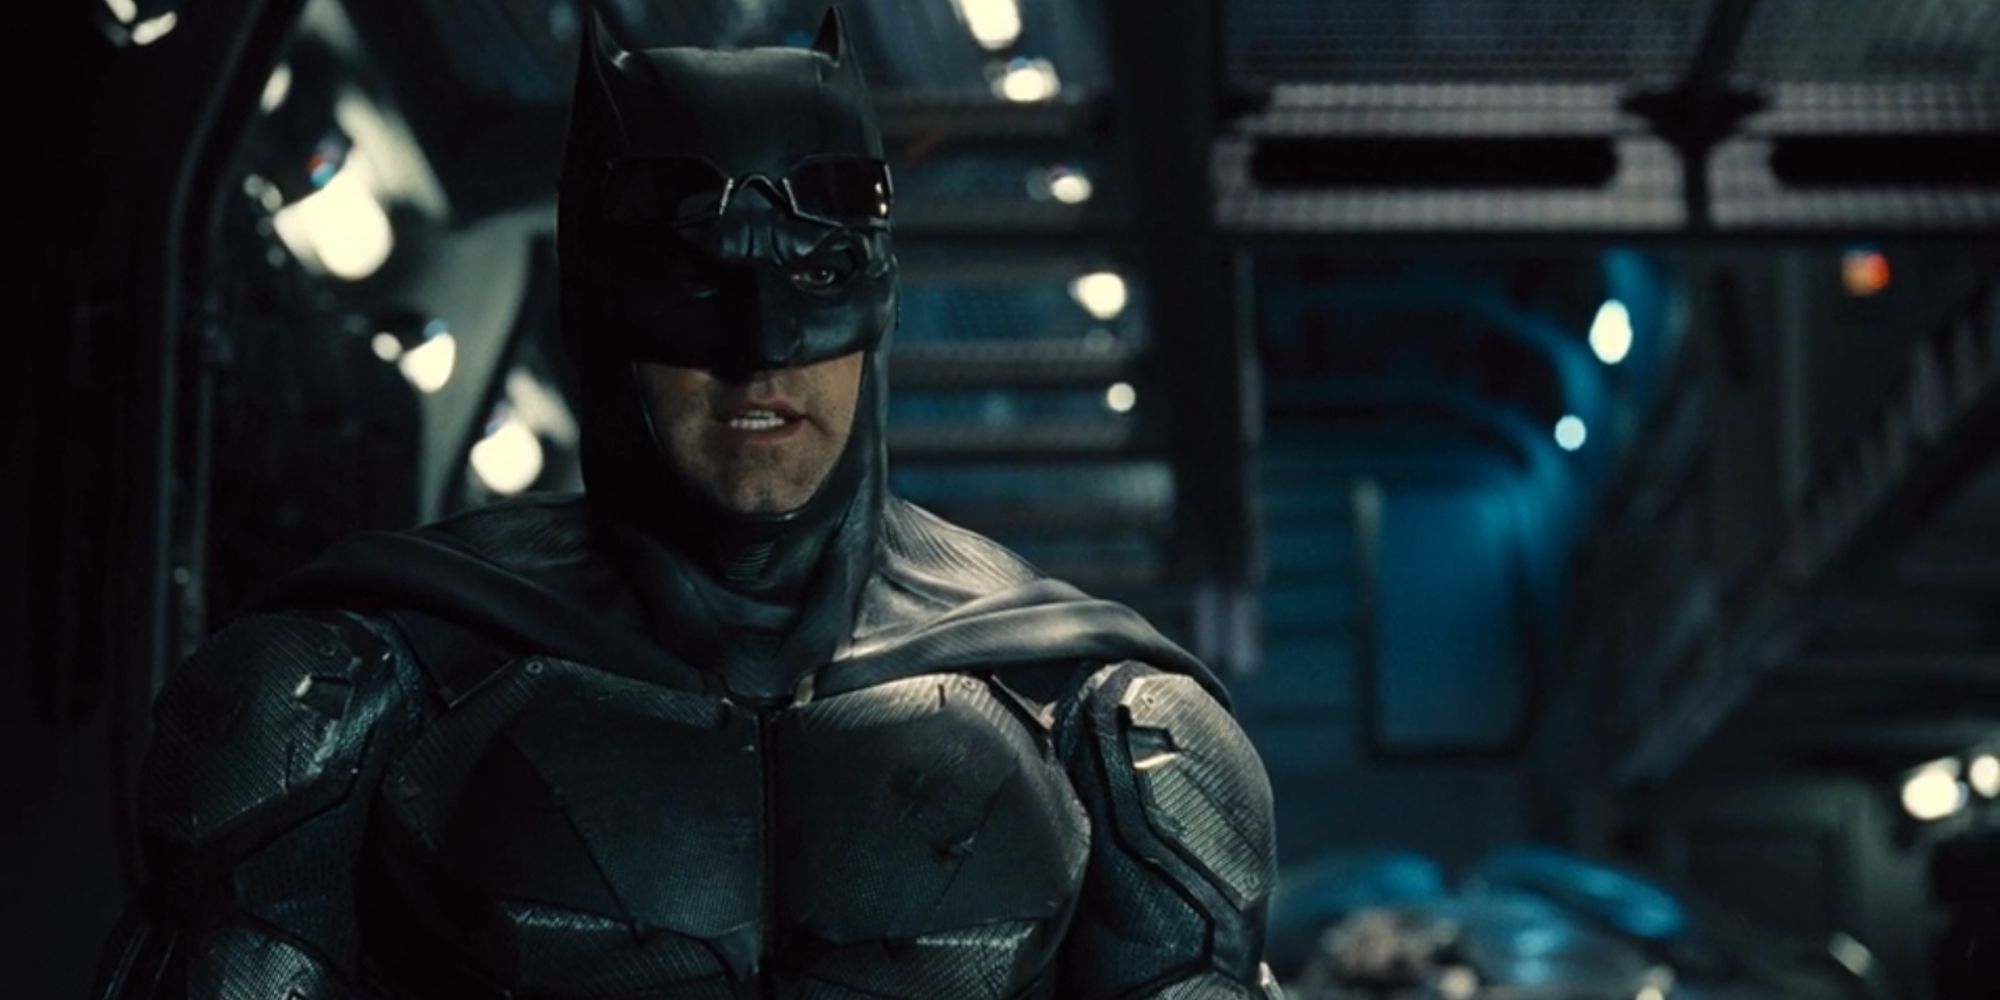 Ben Affleck's Batman in the Tactical Batsuit inside the Flying Fox in Zack Snyder's Justice League